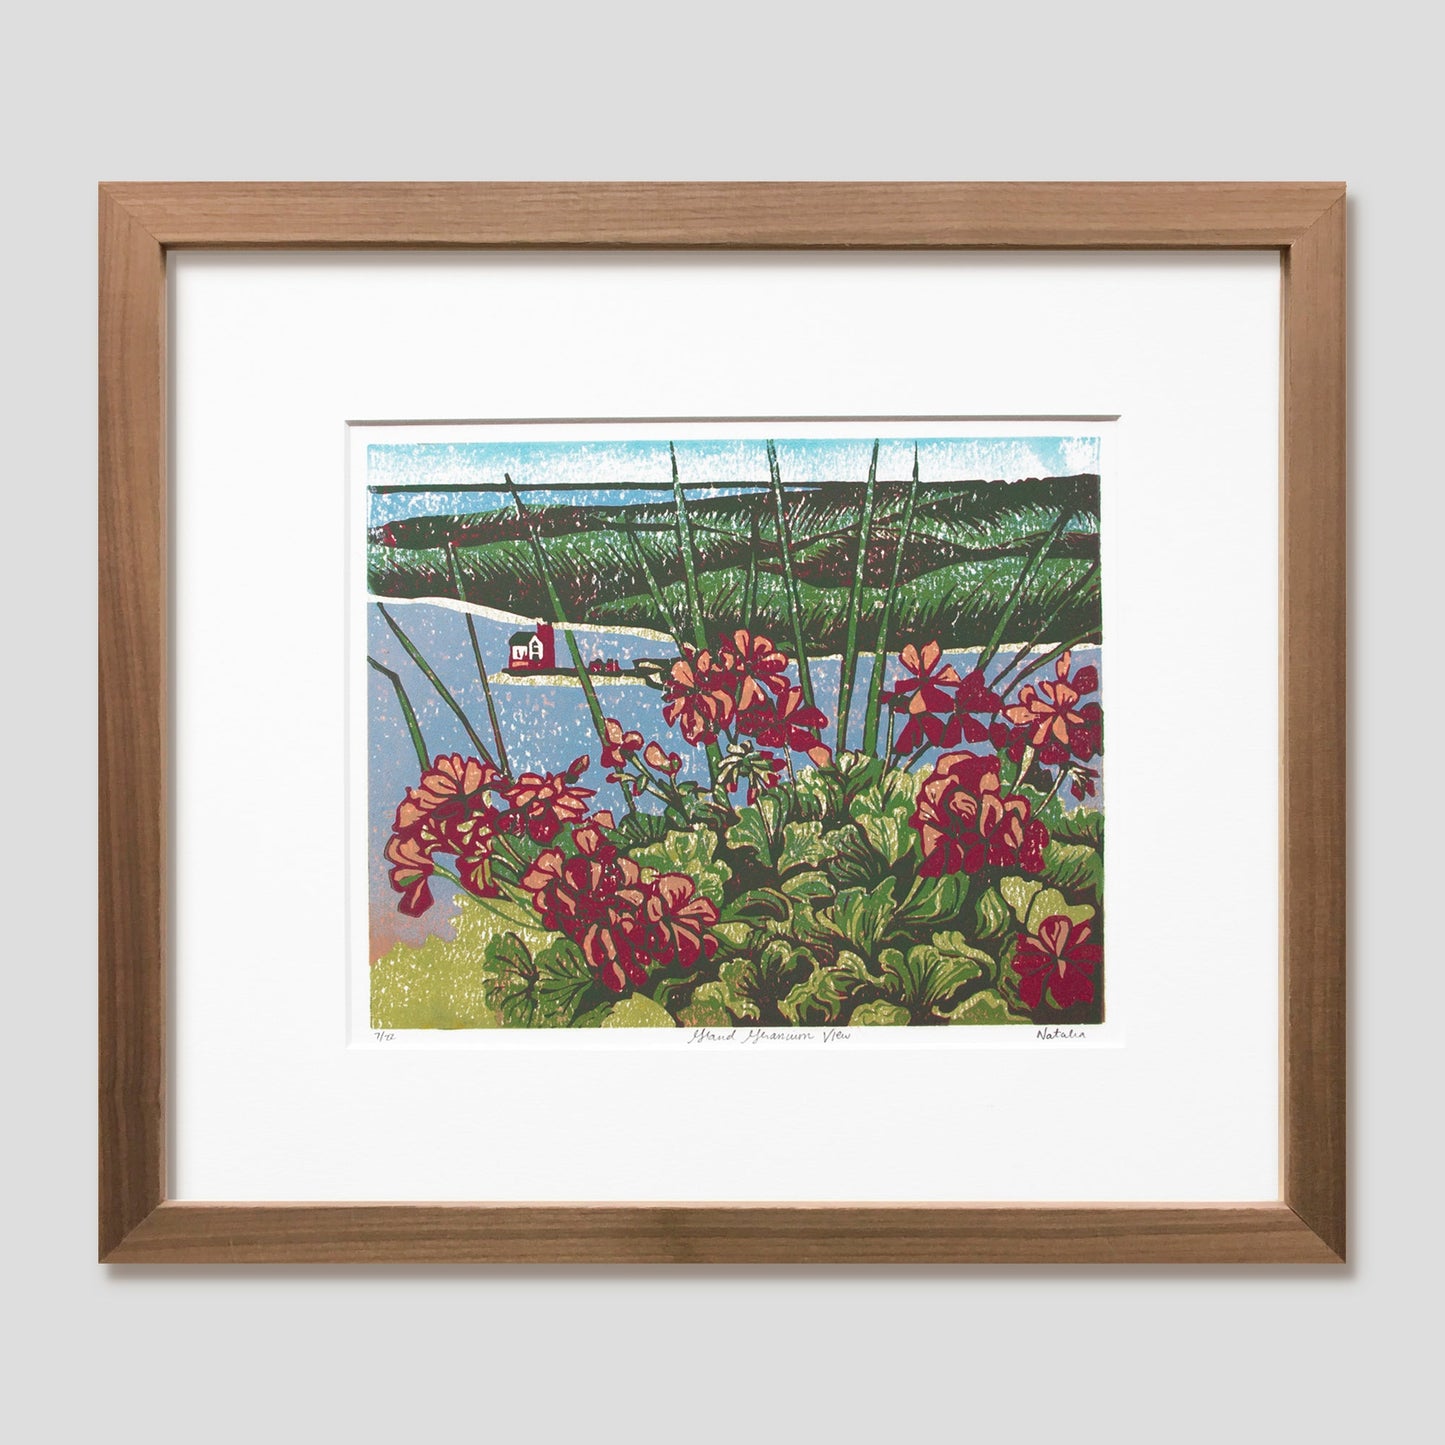 Grand Hotel art featuring the view of Round Island Lighthouse from the hotel's geranium-lined porch by printmaker Natalia Wohletz of Peninsula Prints titled Grand Geraniums.